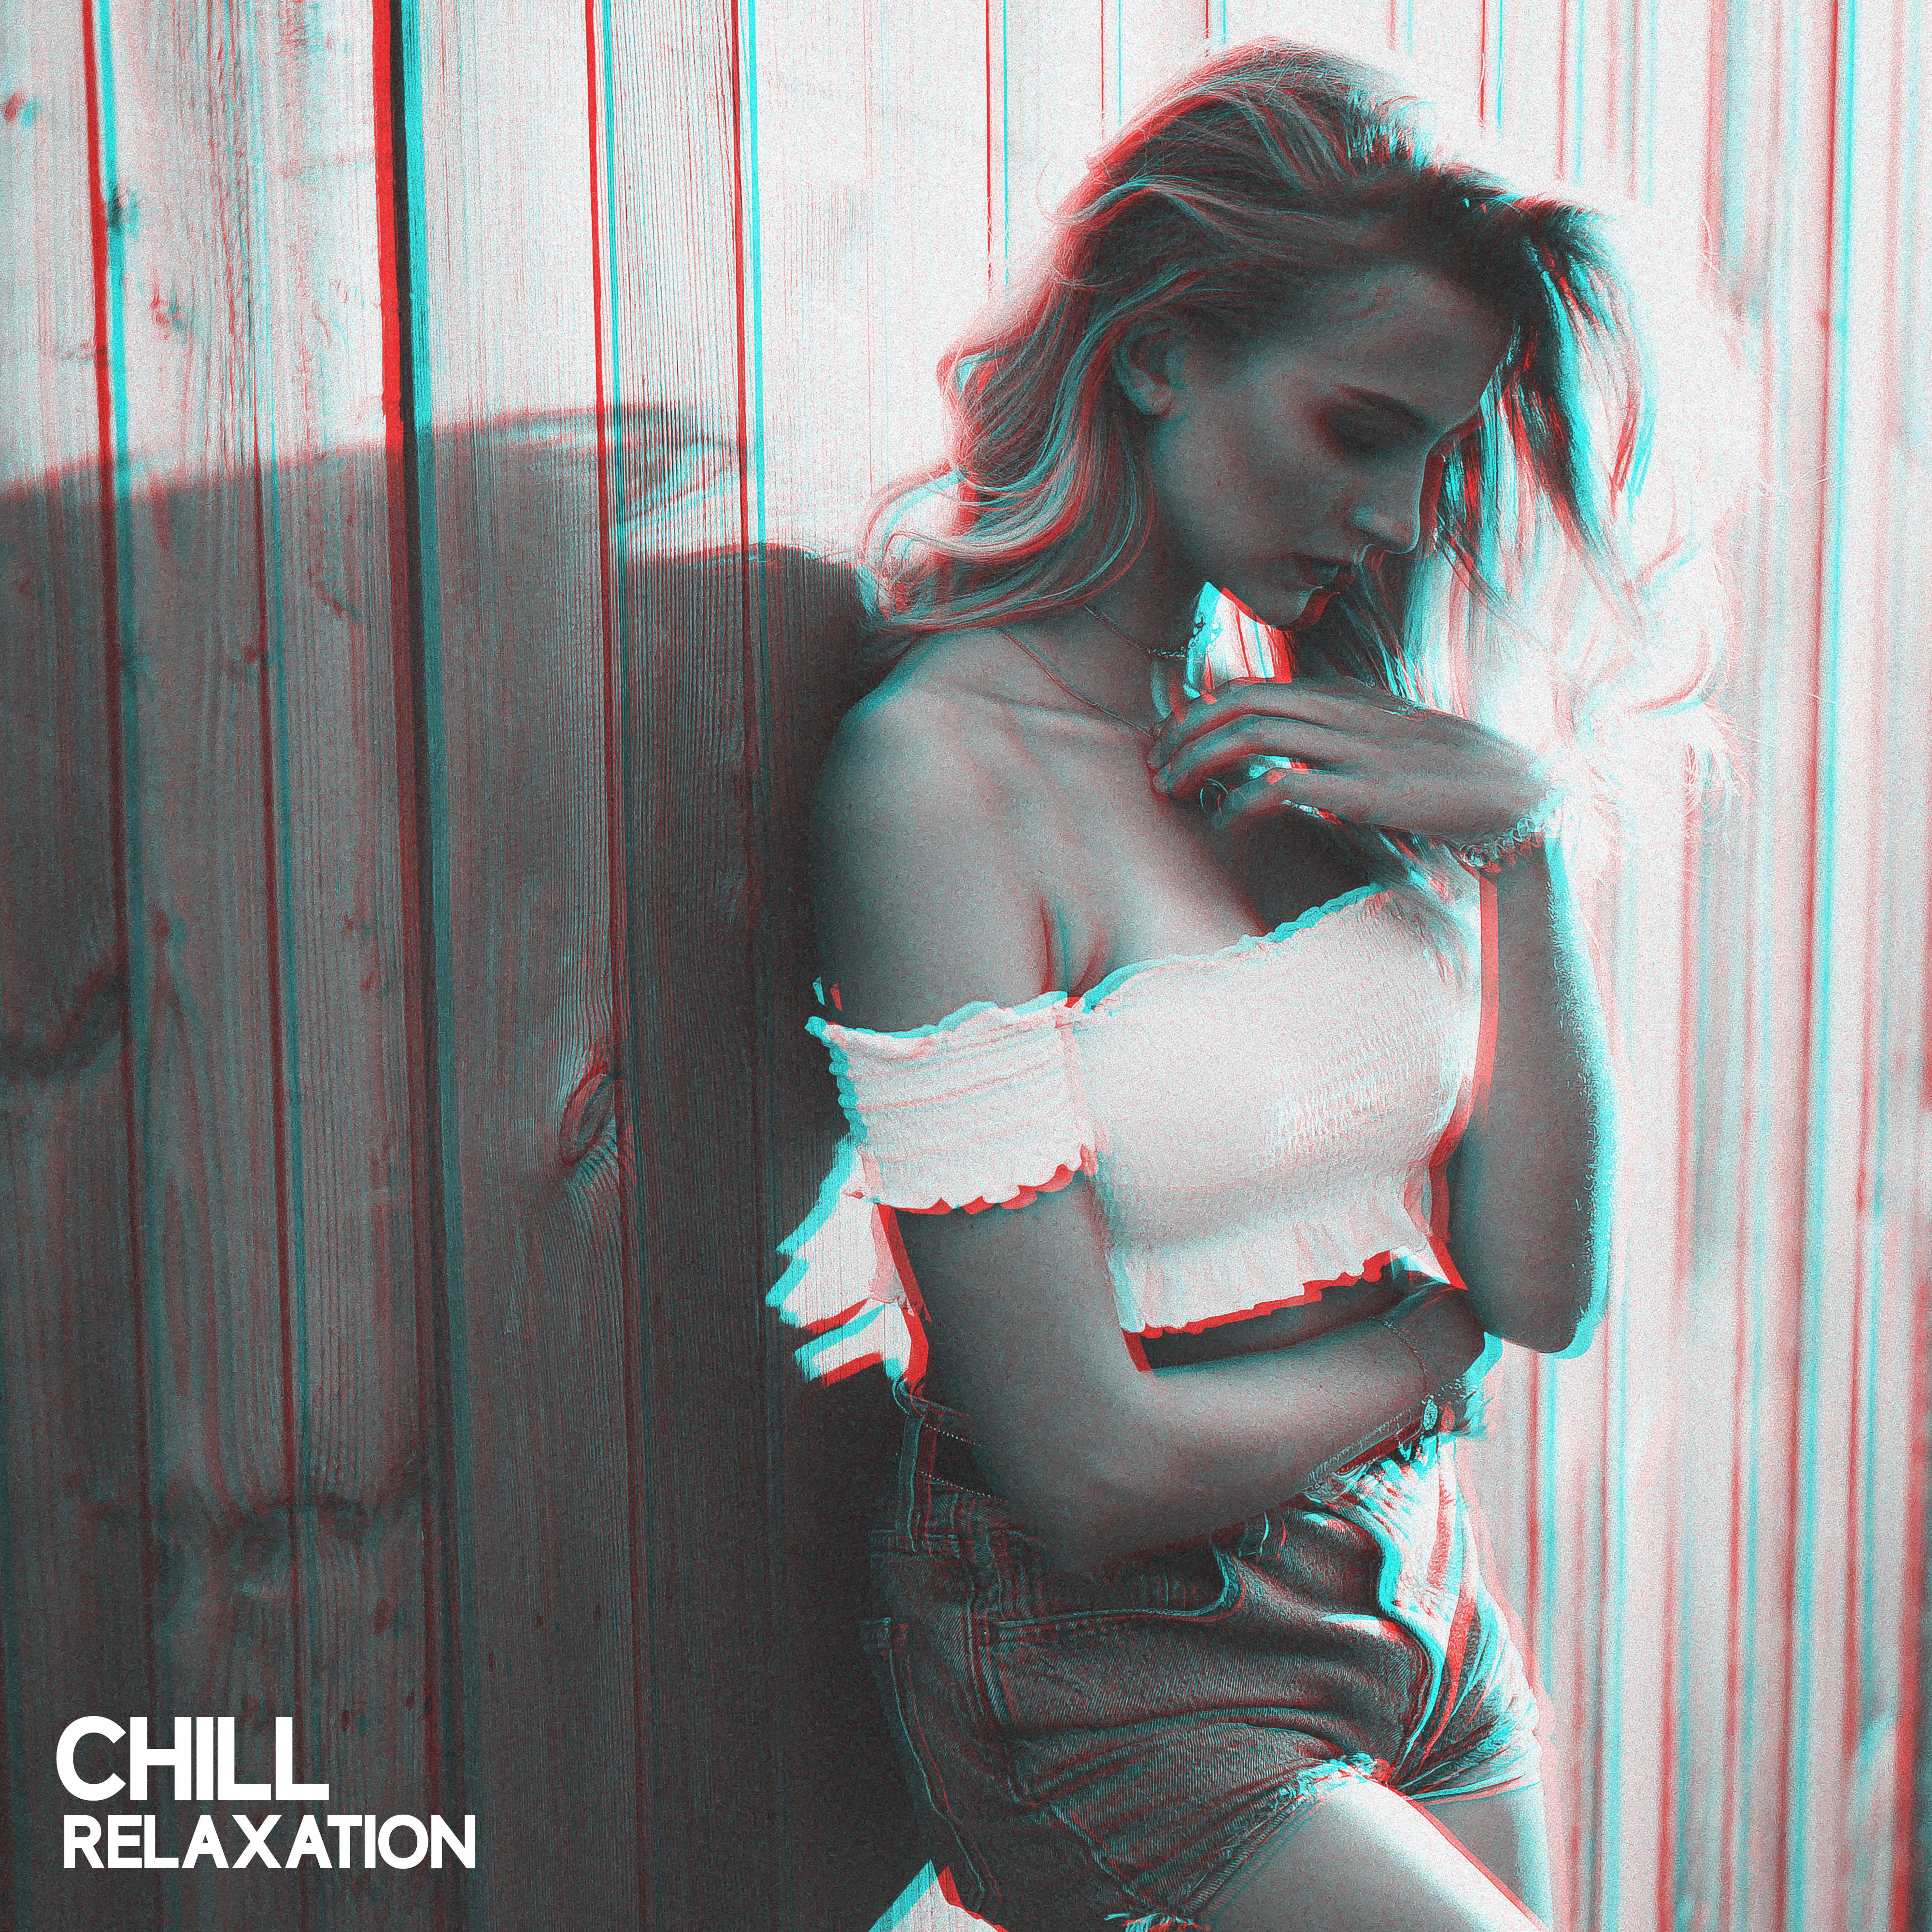 Chill Relaxation: Beach Music, Ibiza Chill Out, Exotic Lounge Collection, Reduce Stress, Music for Sunbathing, Summer Music 2019